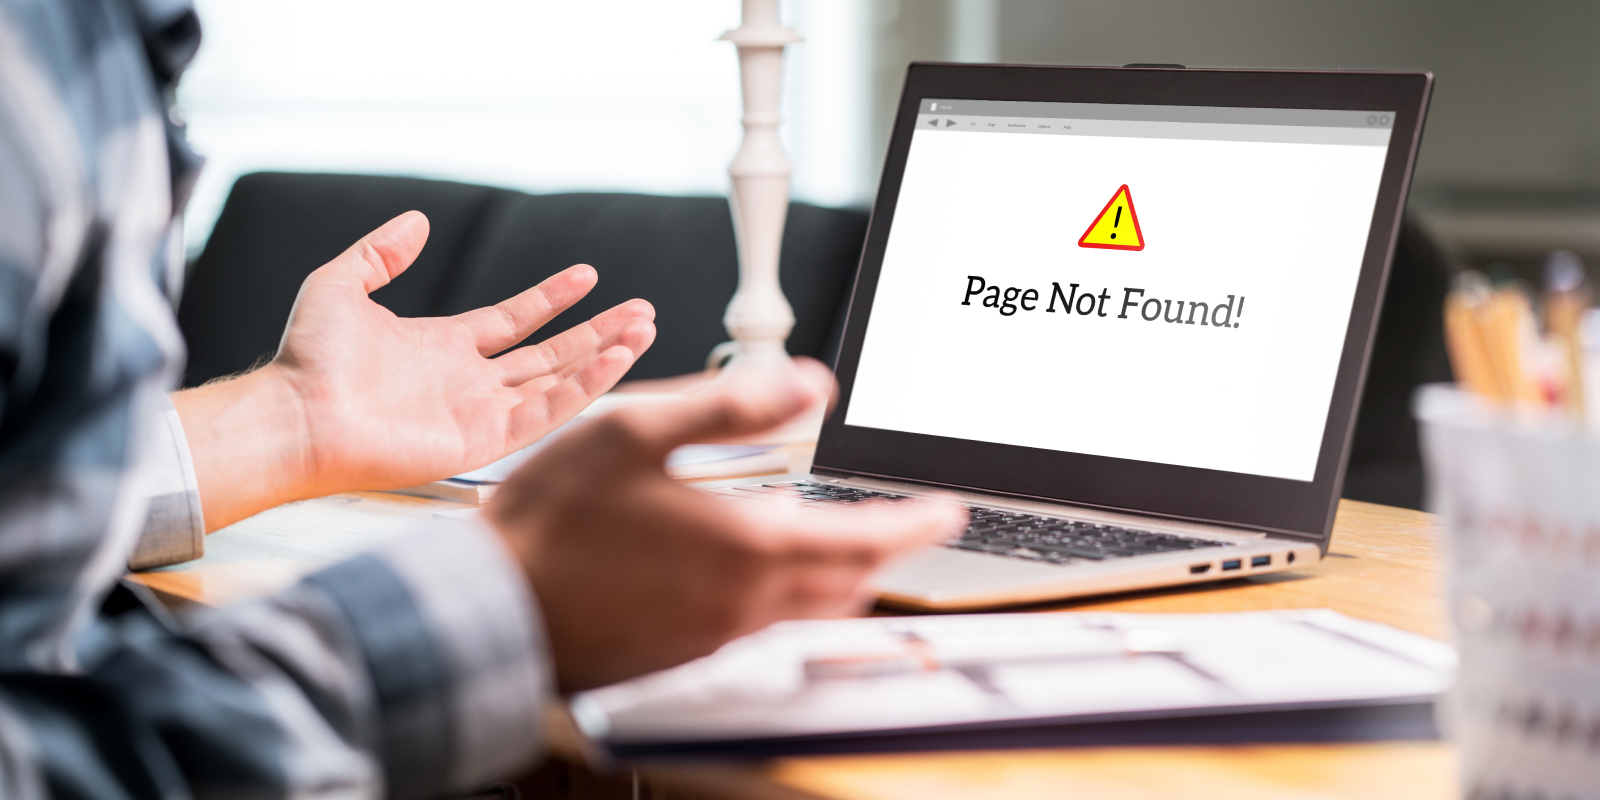 man frustrated at his computer that says "page not found"